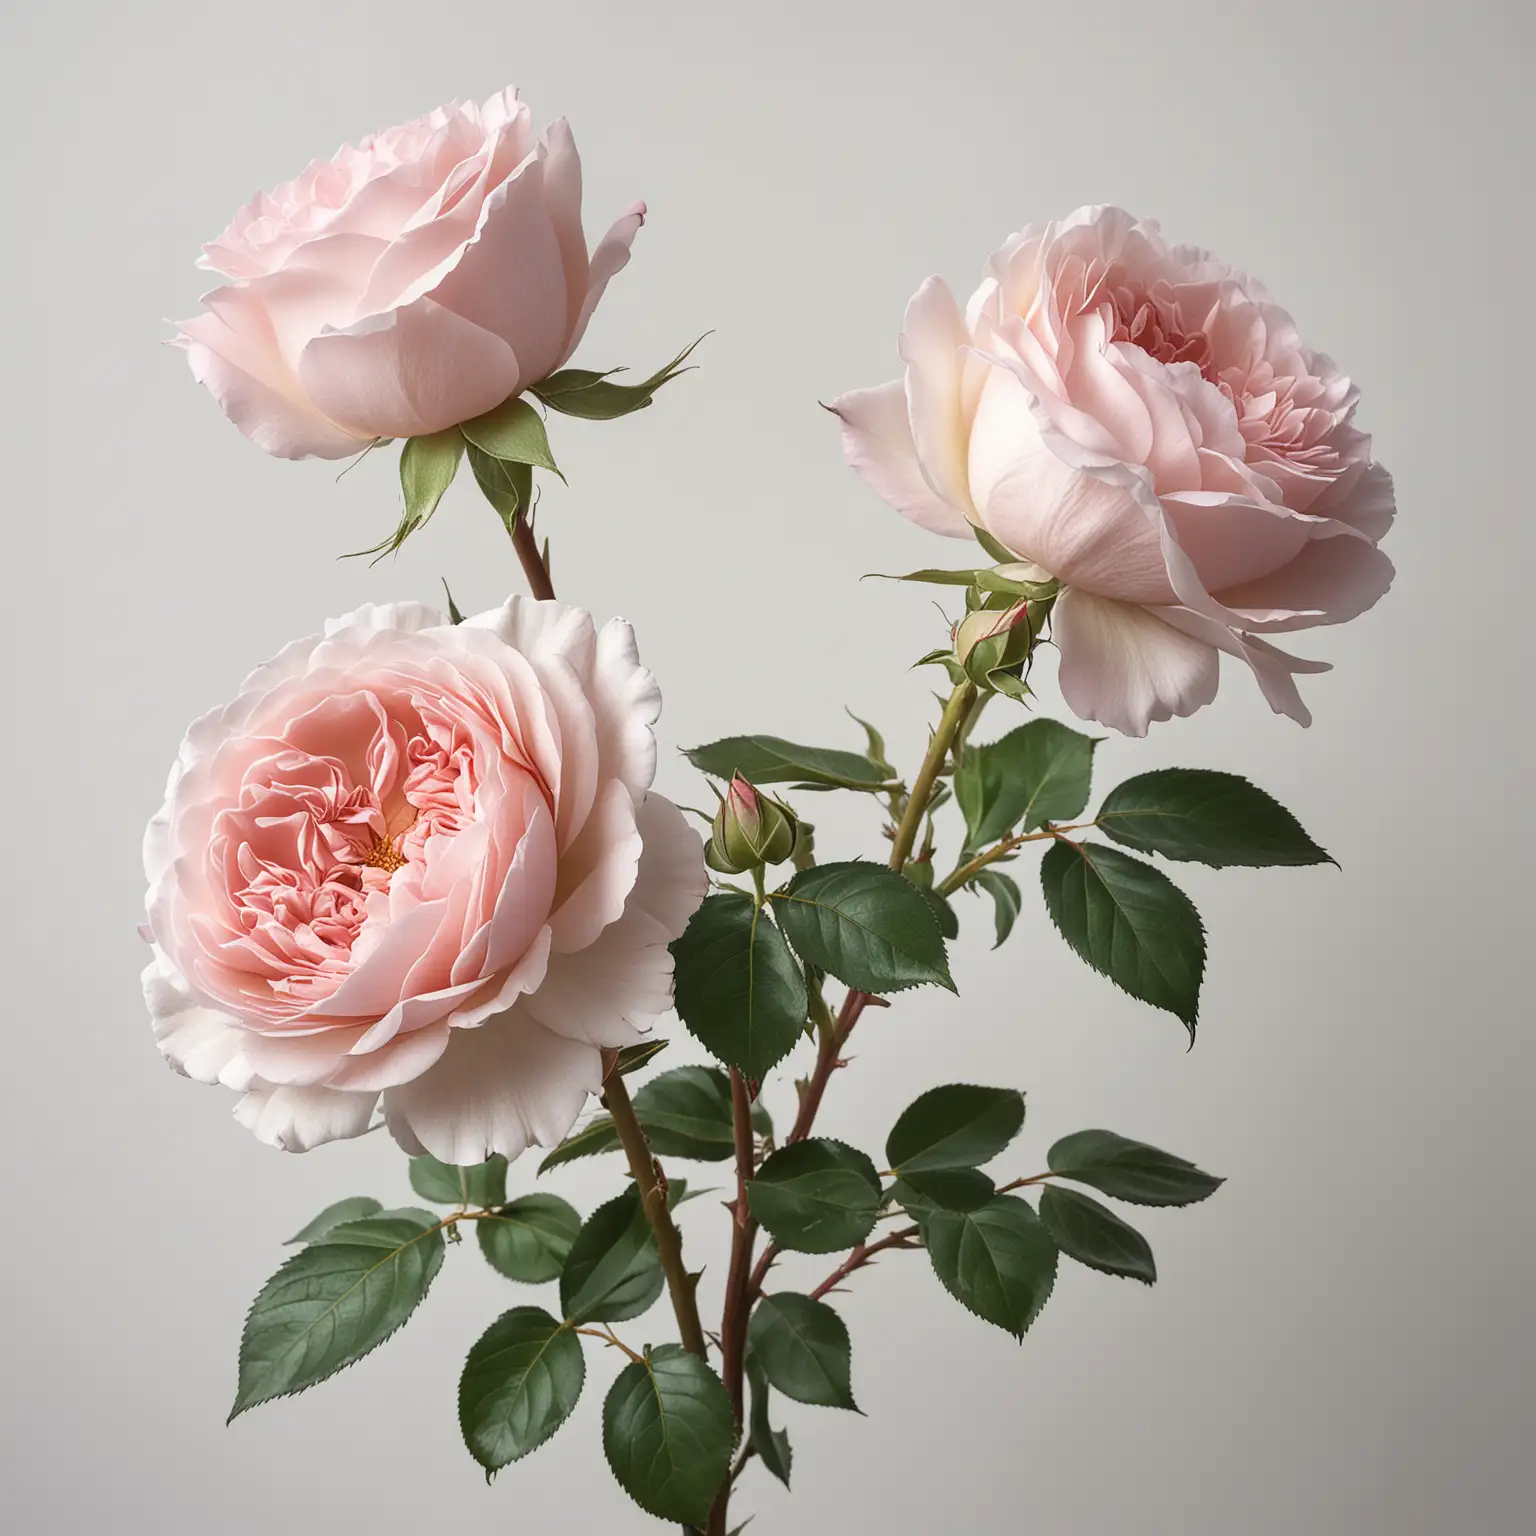 Realistic Trio of David Austin Roses in Pale Creamy Dusty Pink on Solid White Background